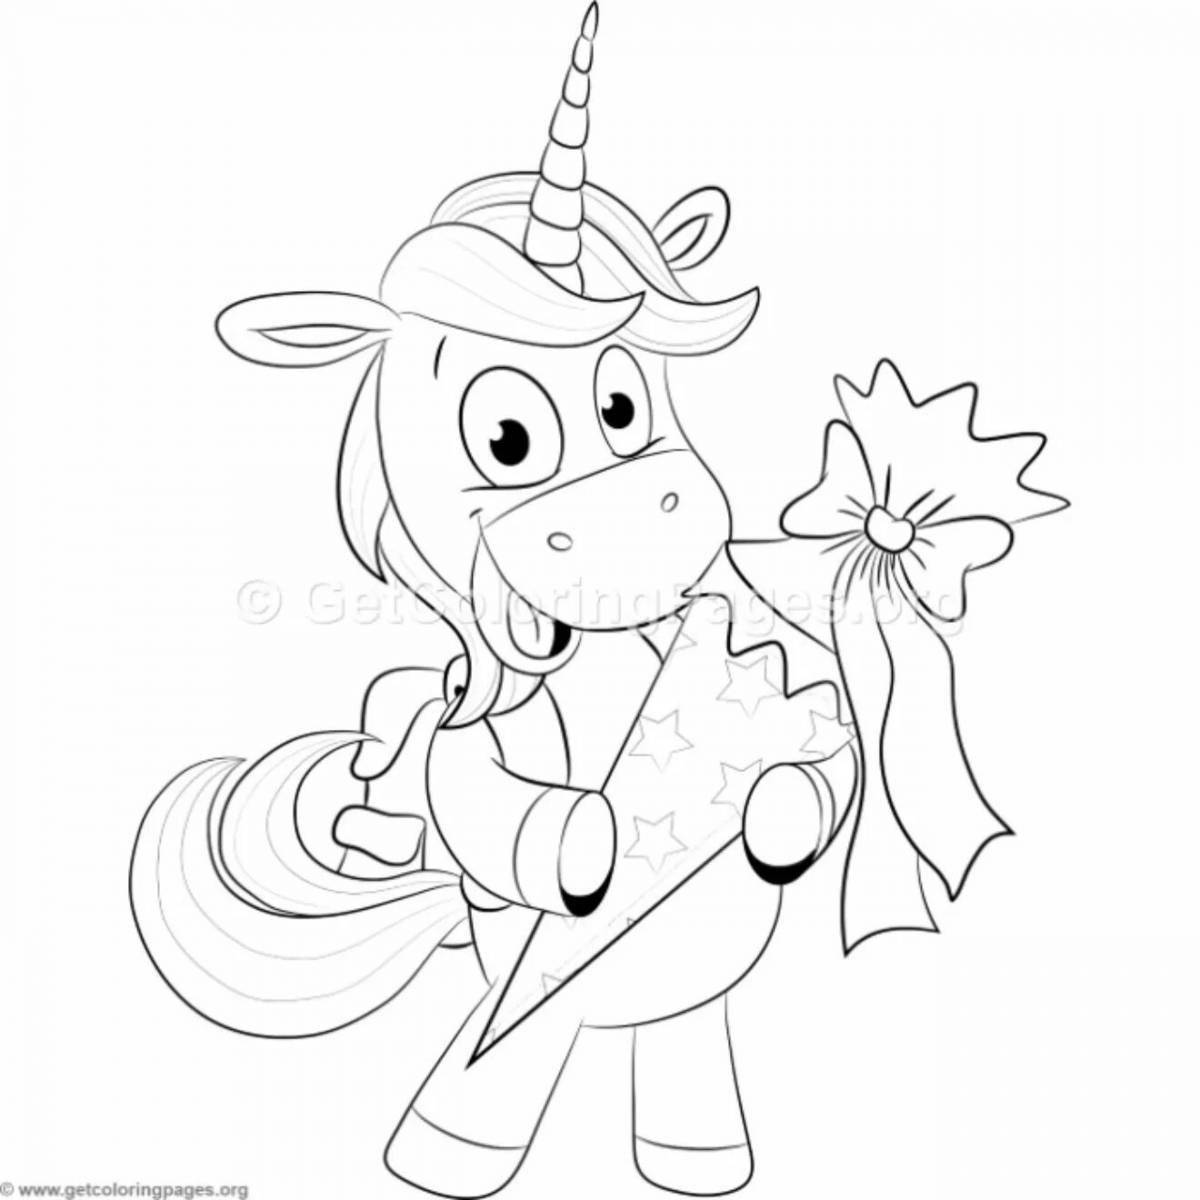 Vivacious coloring page unicorn with watermelon